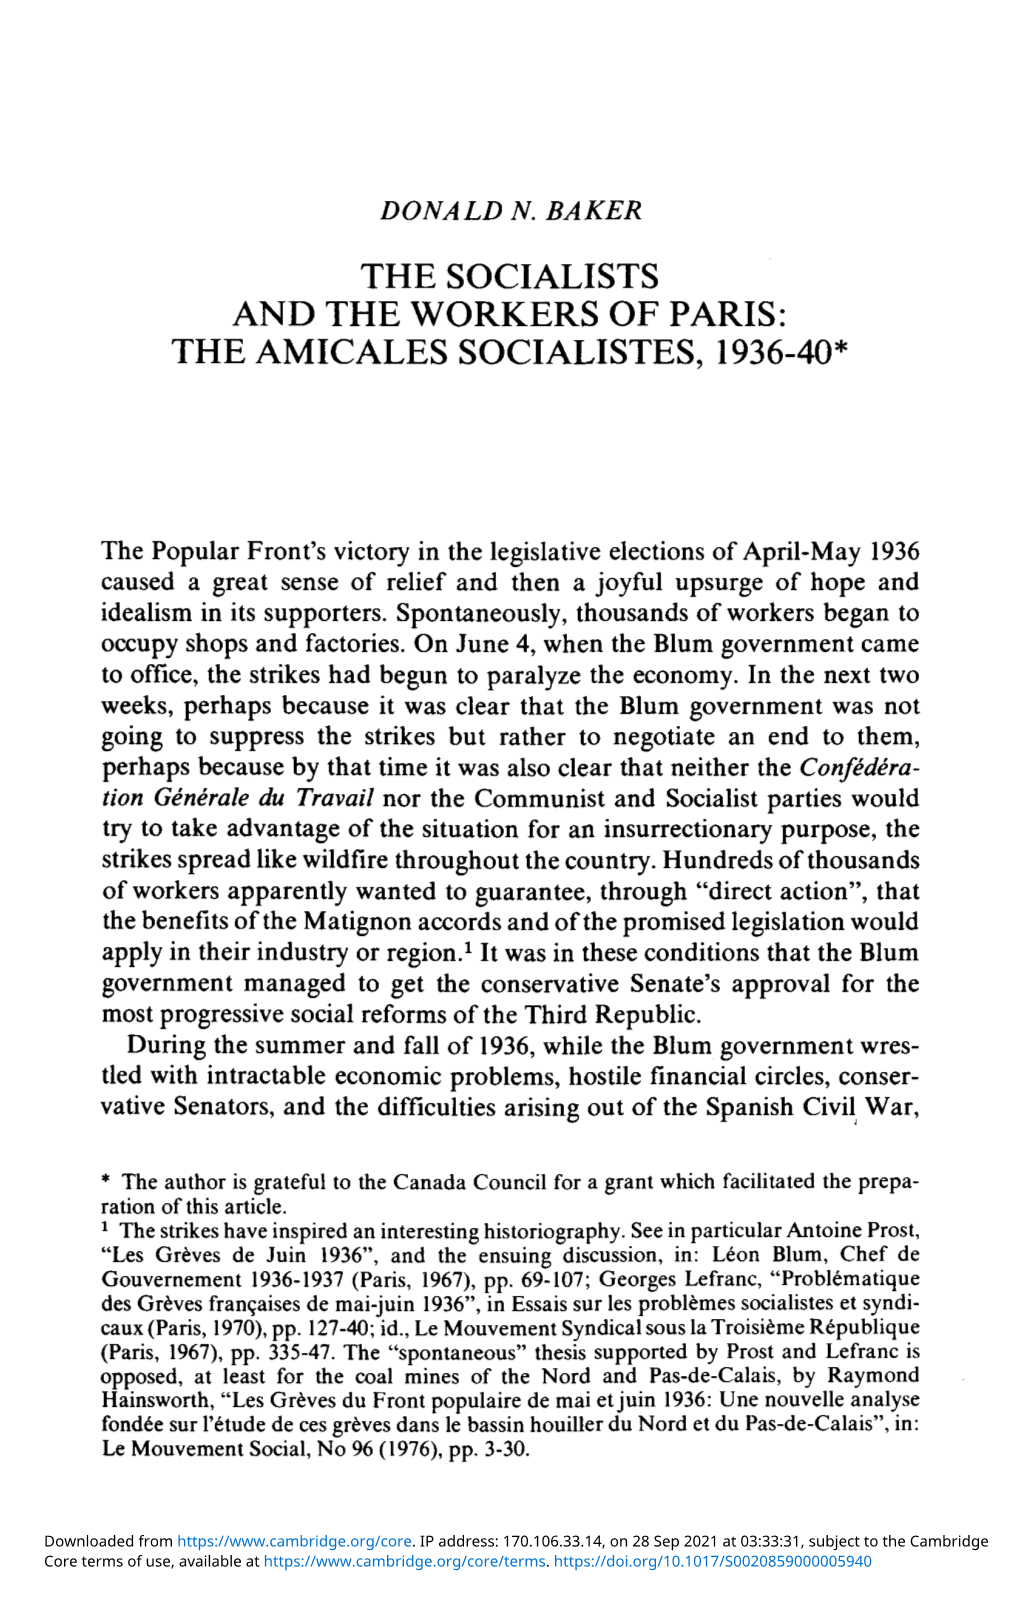 The Socialists and the Workers of Paris: the Amicales Socialistes, 1936-40*